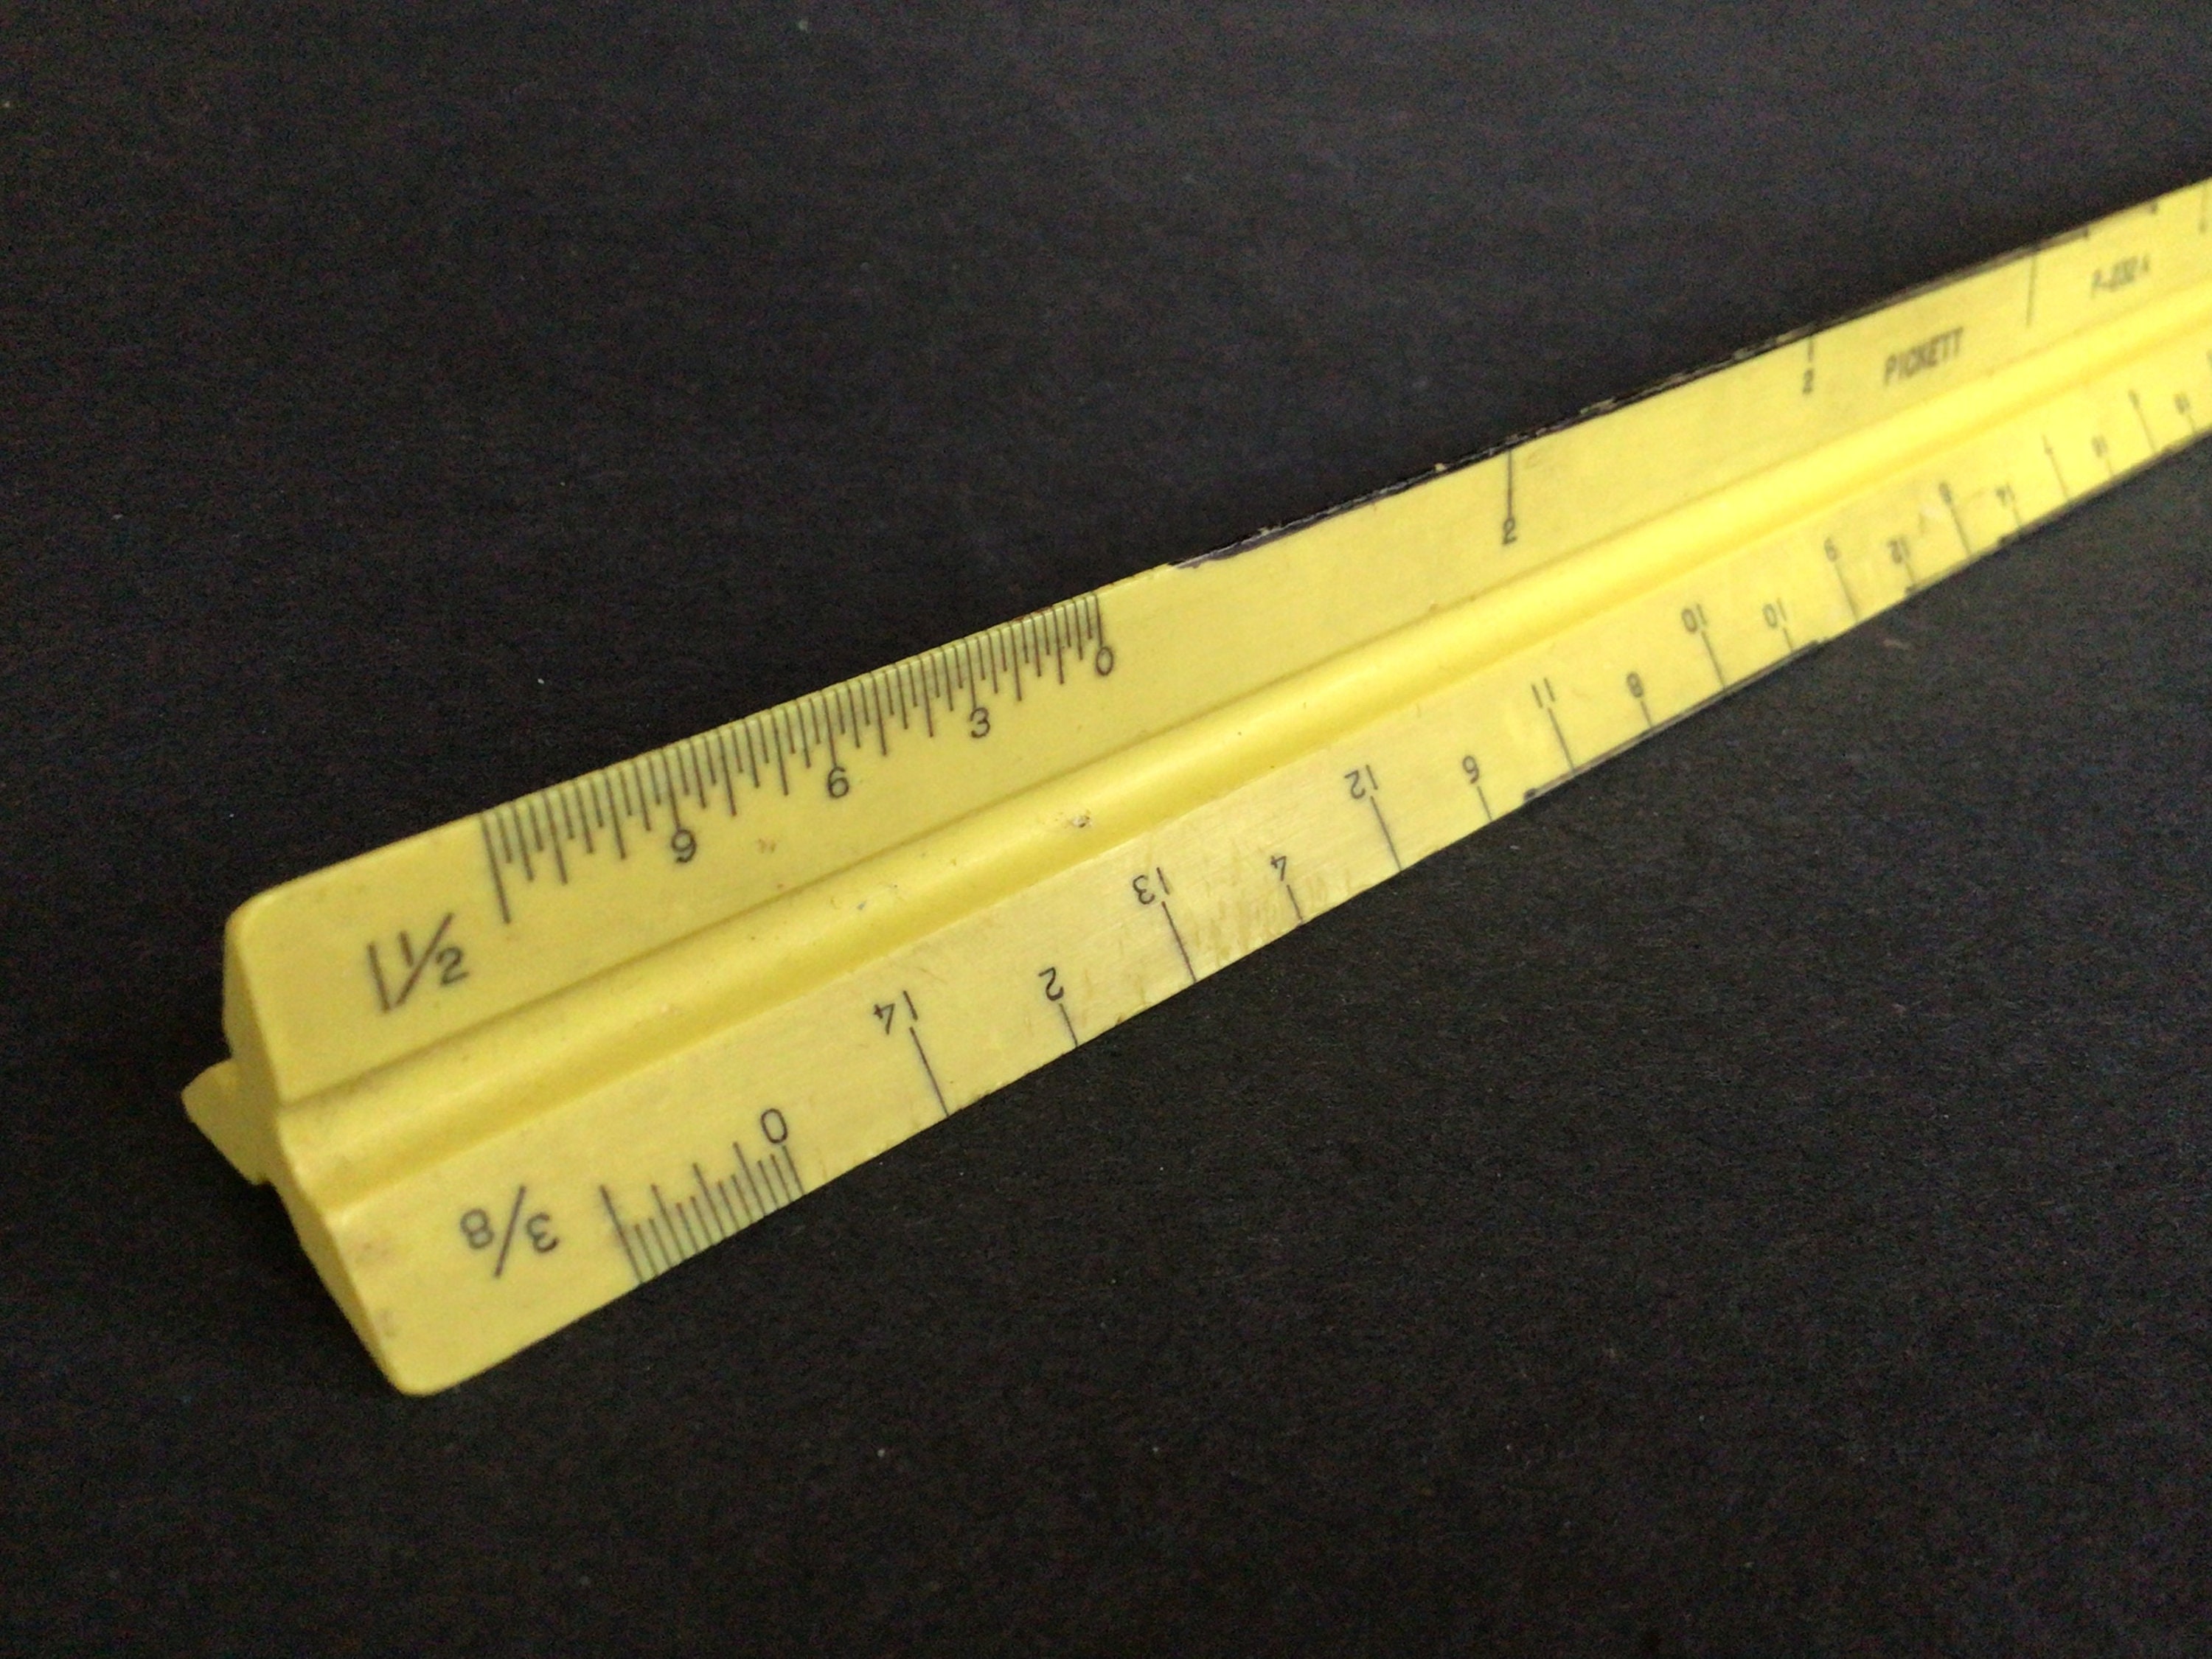 1990s Drafting Ruler Inches Centimeters Imperial Metric Pickett P 231TR  Triangle Acrylic Ruler 